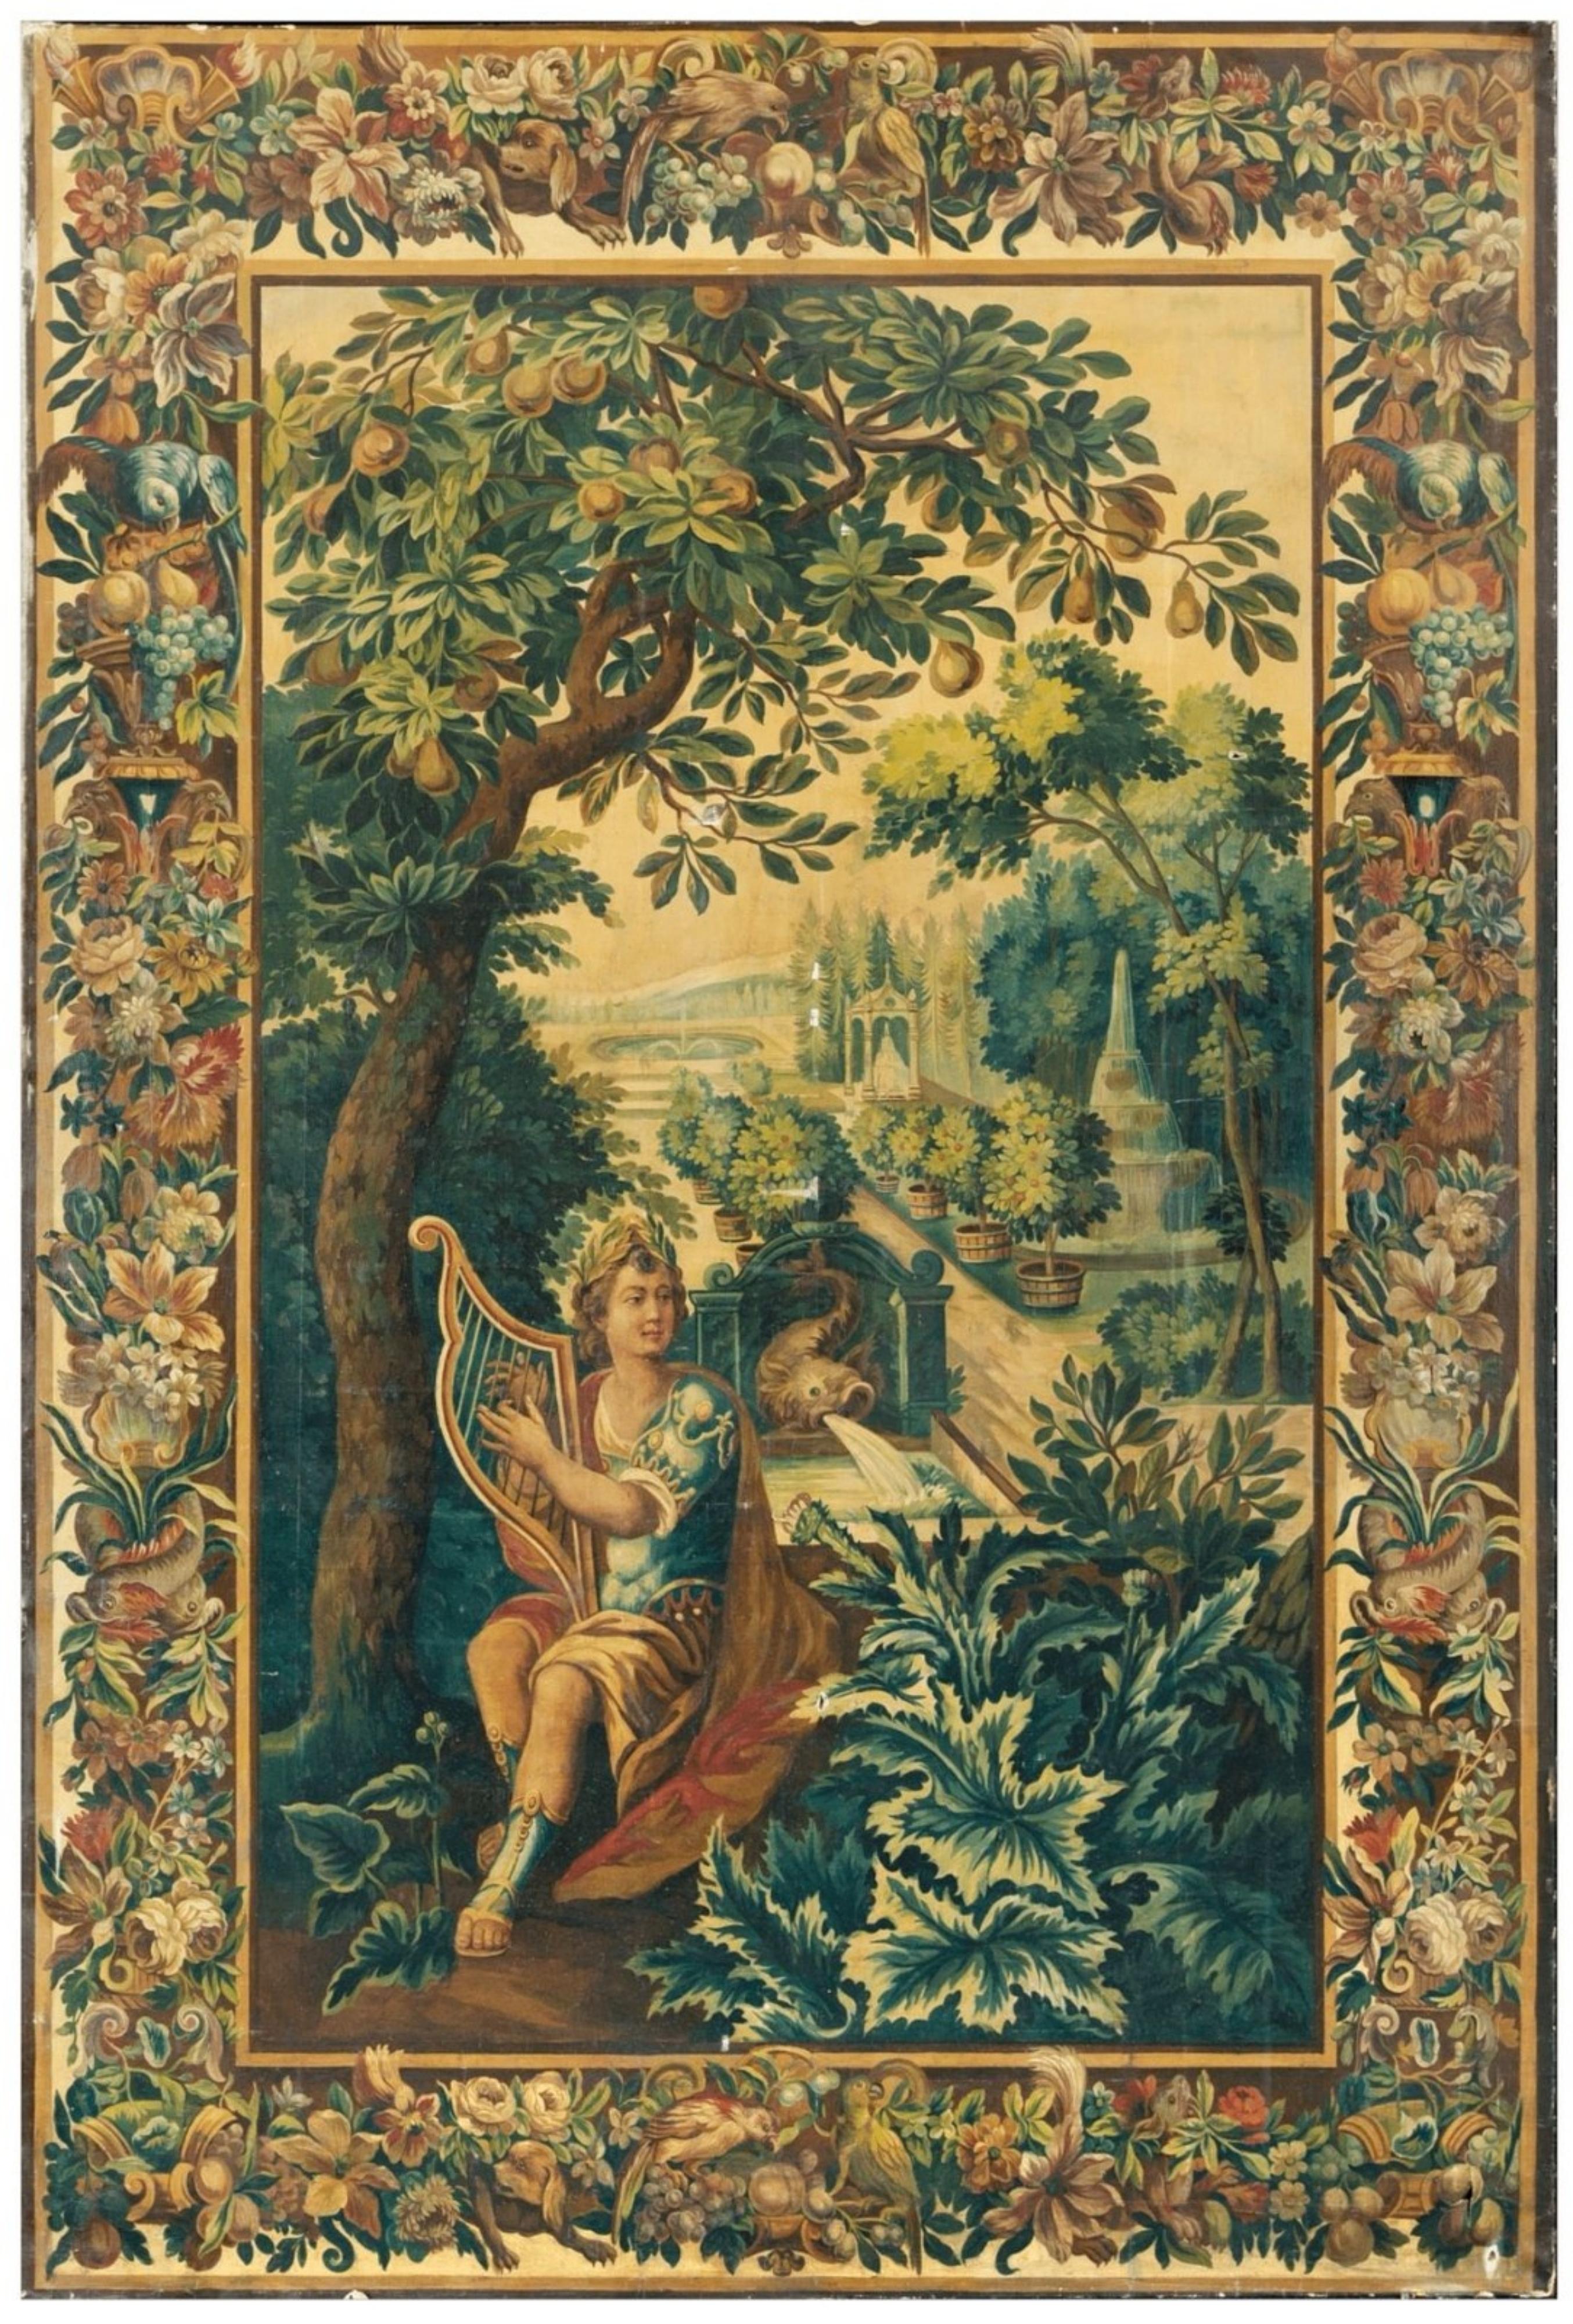 IMPORTANT LARGE PAINTING Venetian School 18th Century

with a mythological subject depicting the God Apollo in the foreground with his lyre in a French garden probably of the palace of Versailles.

The painting is framed by a large border decorated